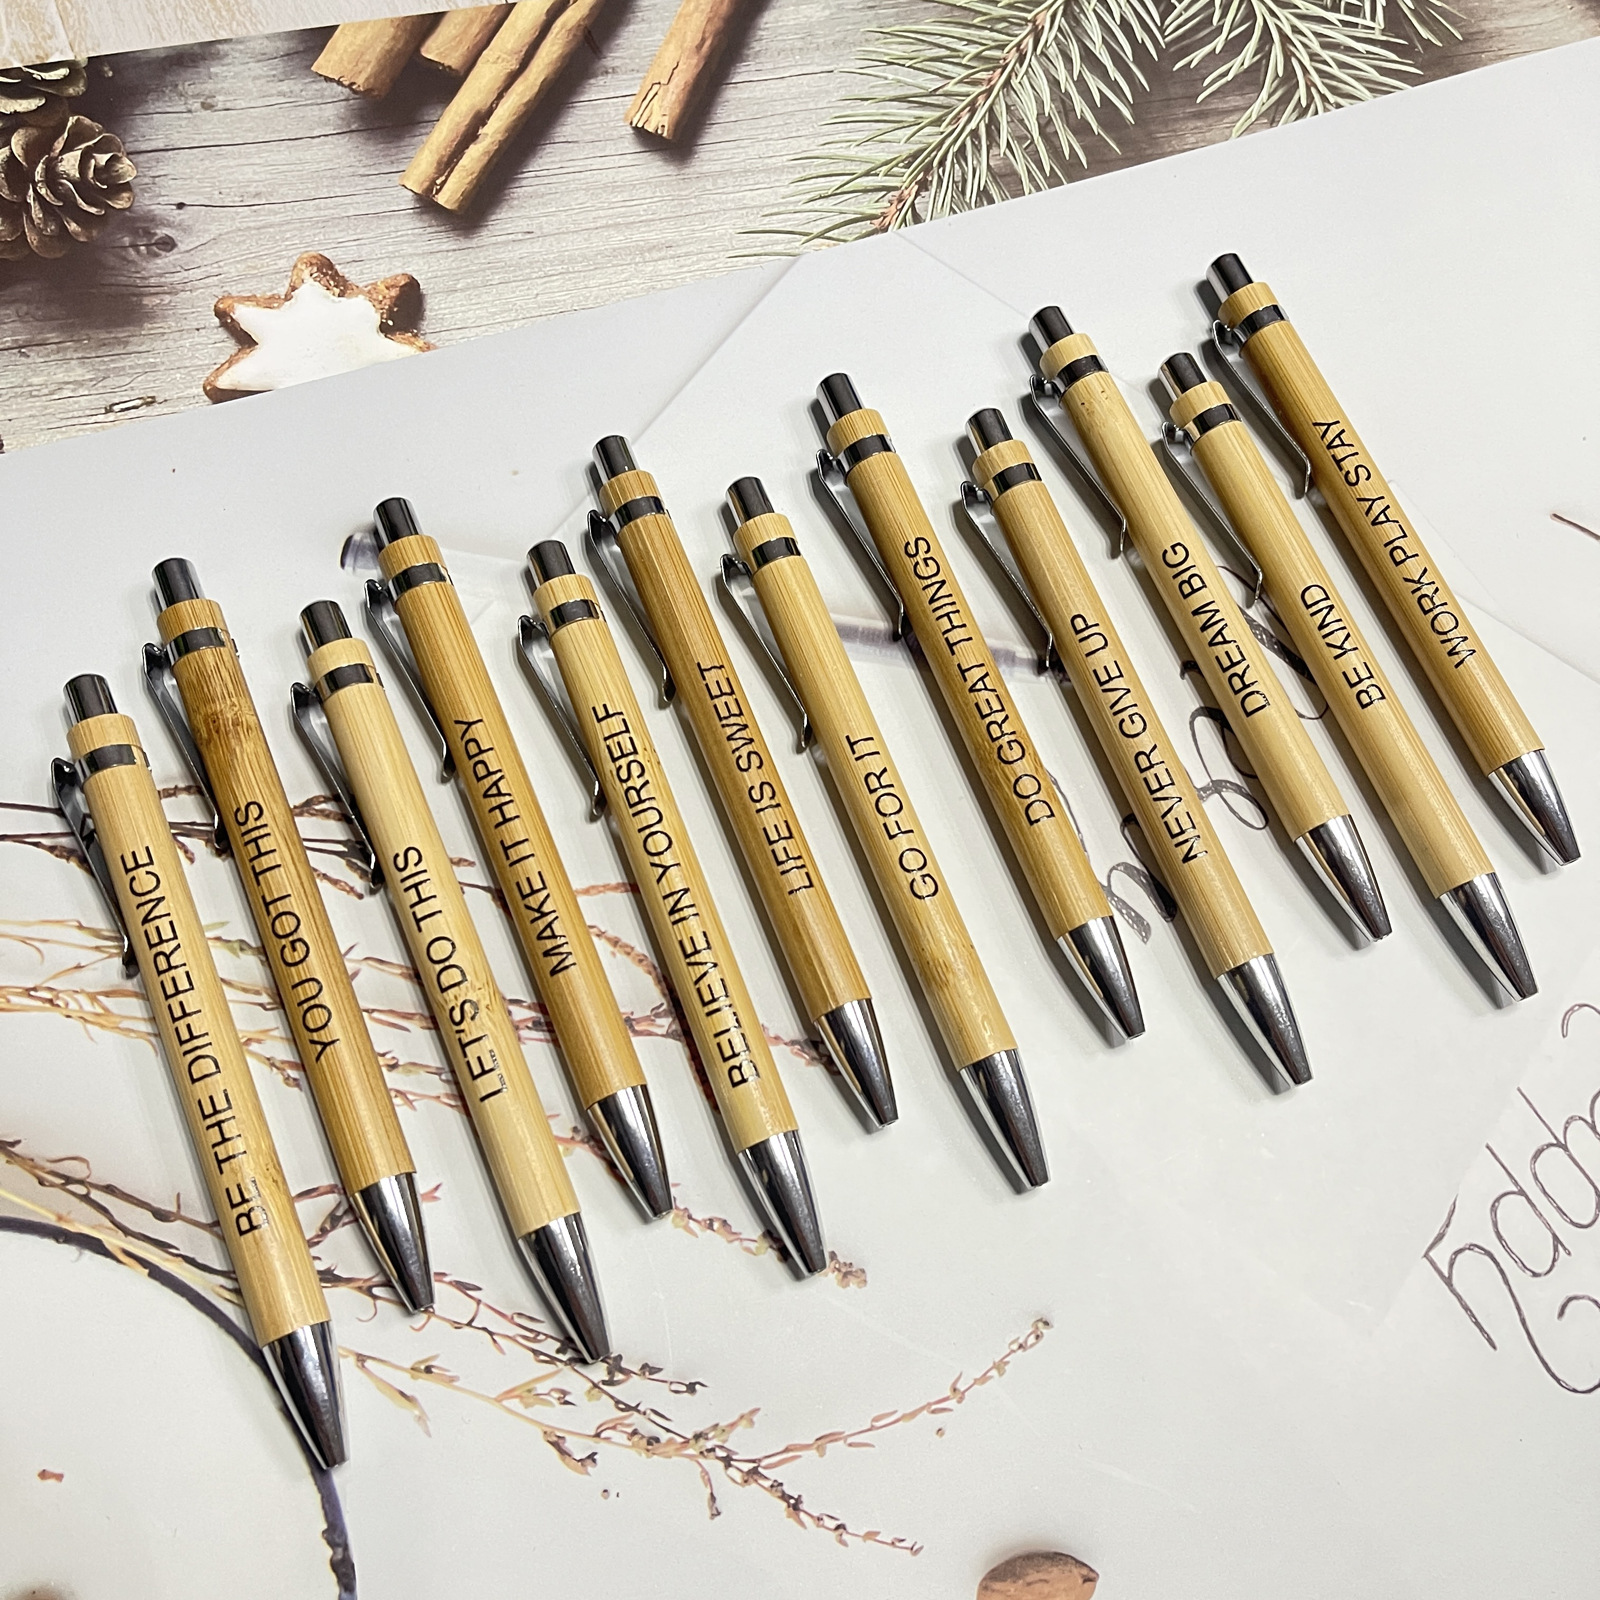  Diameleo Ultimate Set of Engraved Pens for Sarcastic Souls -  Ultimate Bamboo Pens for Sarcastic Souls - 7 Pack Bamboo Pens with Sayings  for Adults - Swear Word Funny Pens